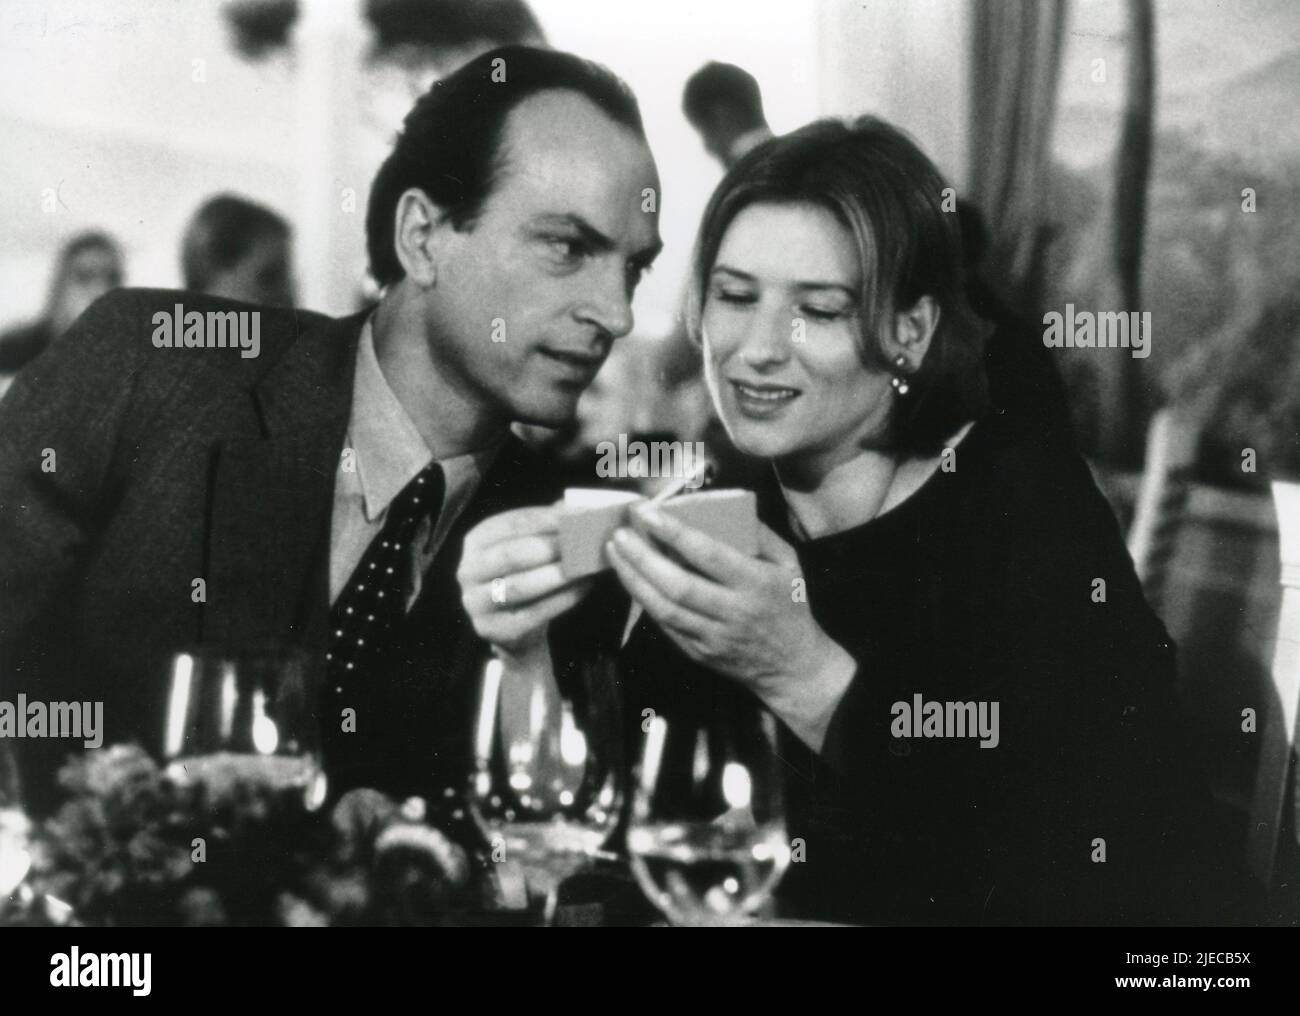 German actor Herbert Knaup and actress Corinna Harfouch in the movie Father's Day, Germany 1996 Stock Photo